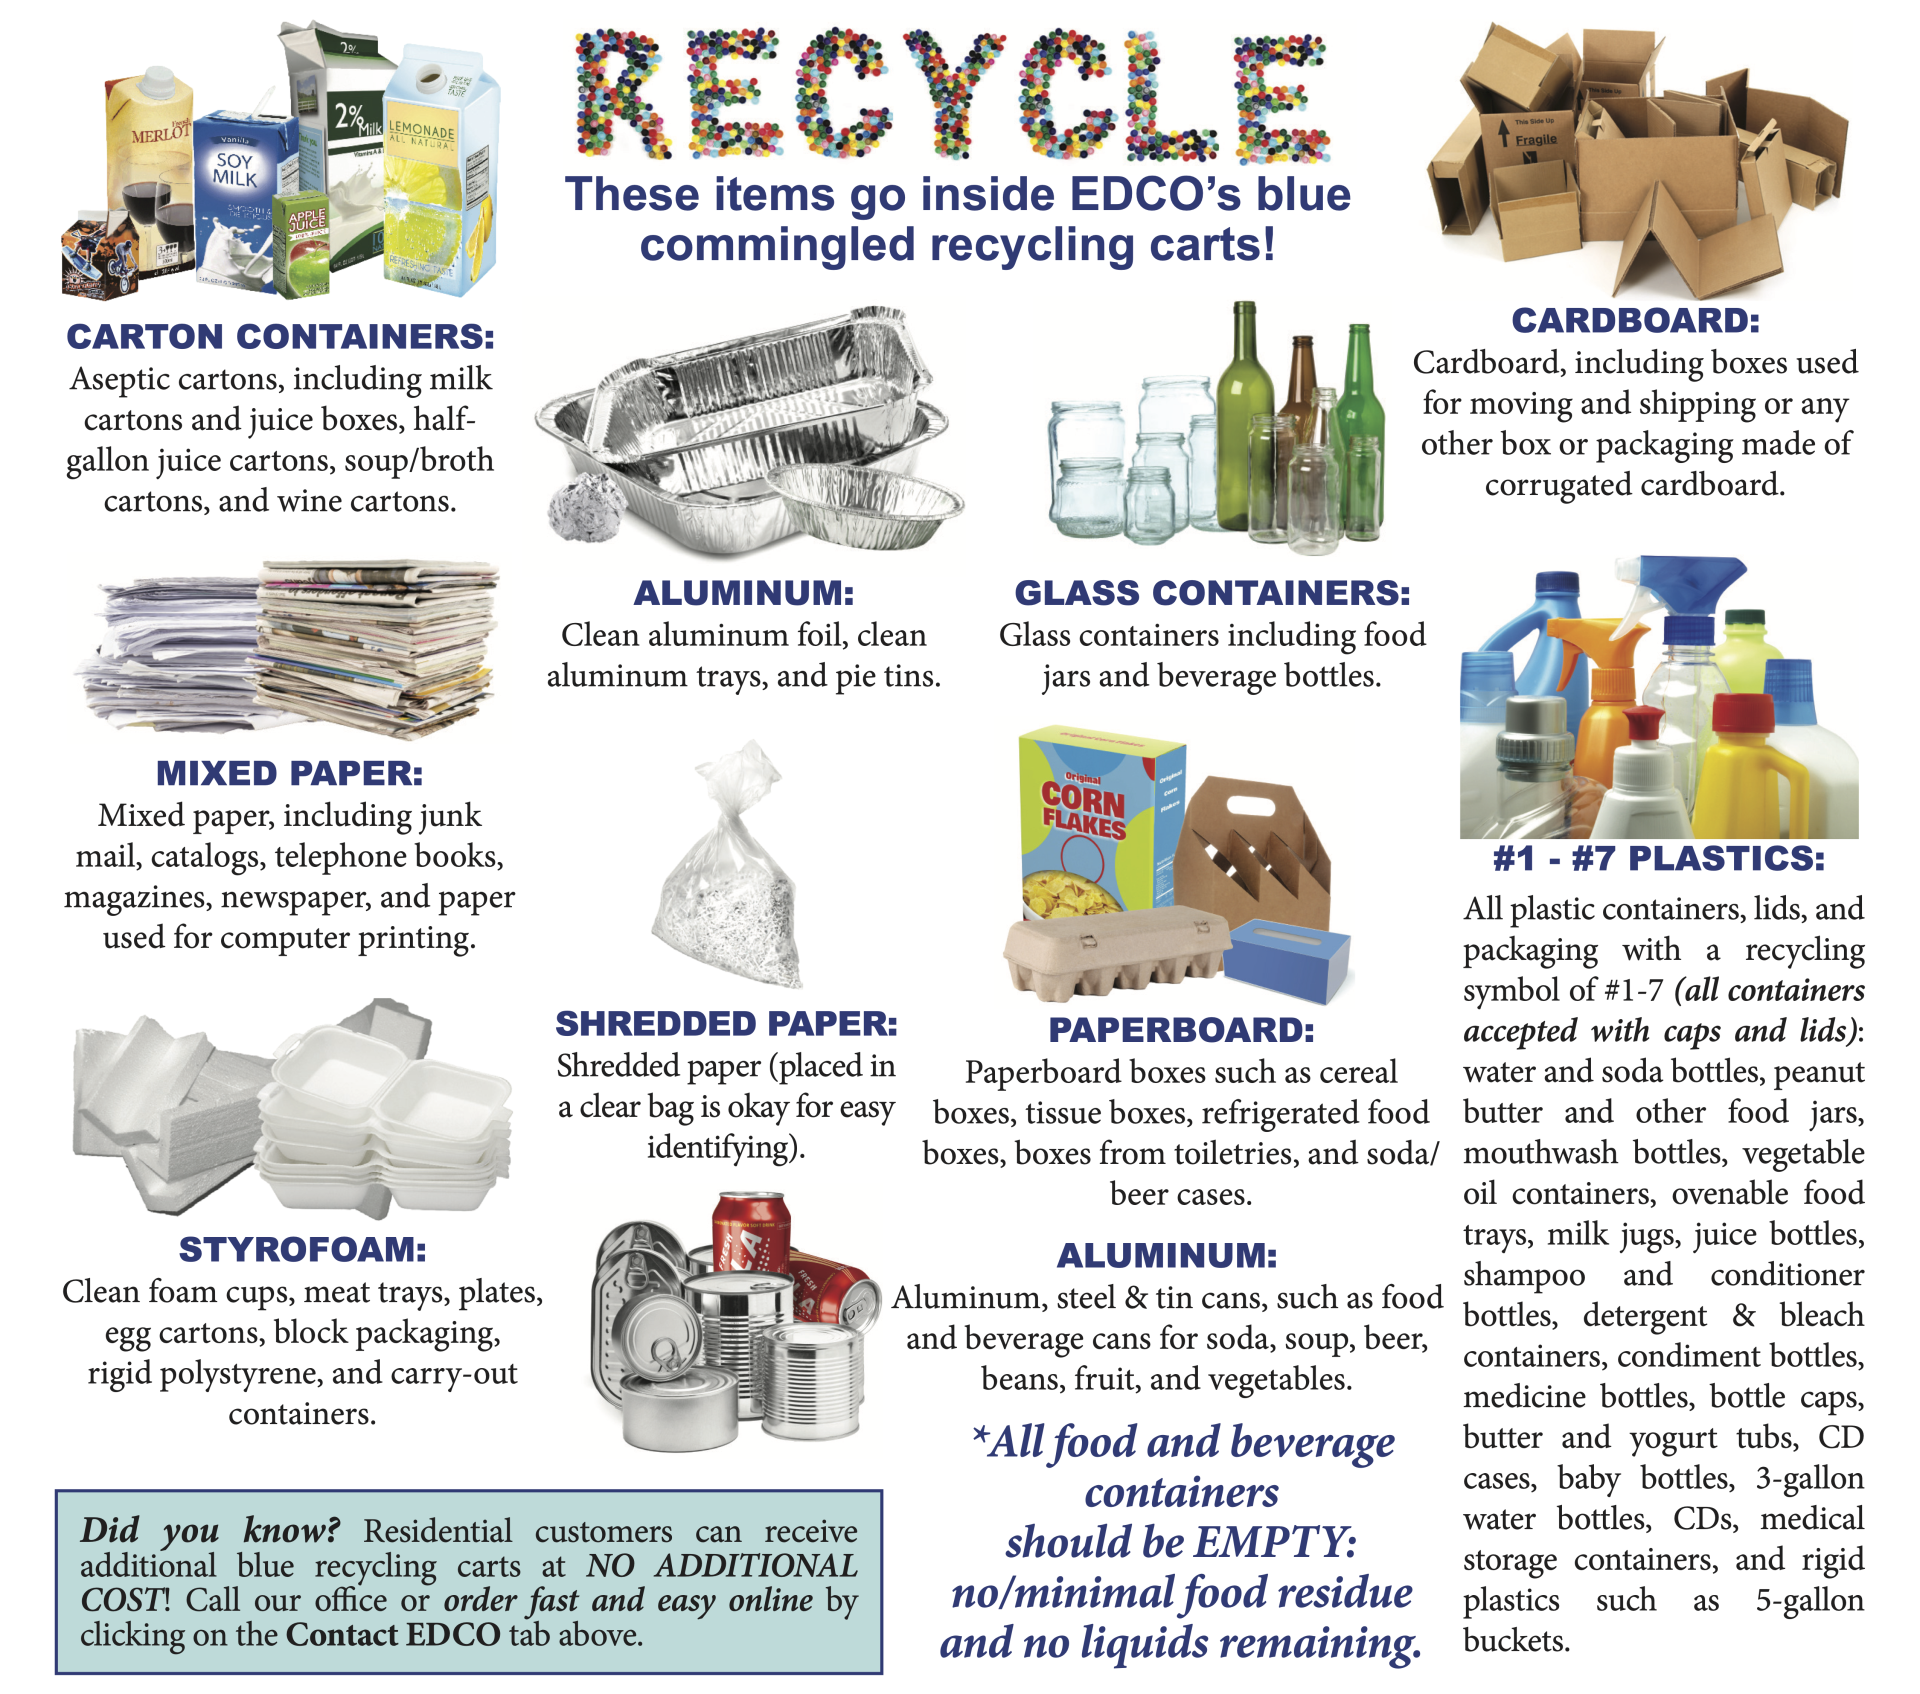 What's Recyclable in Encinitas?